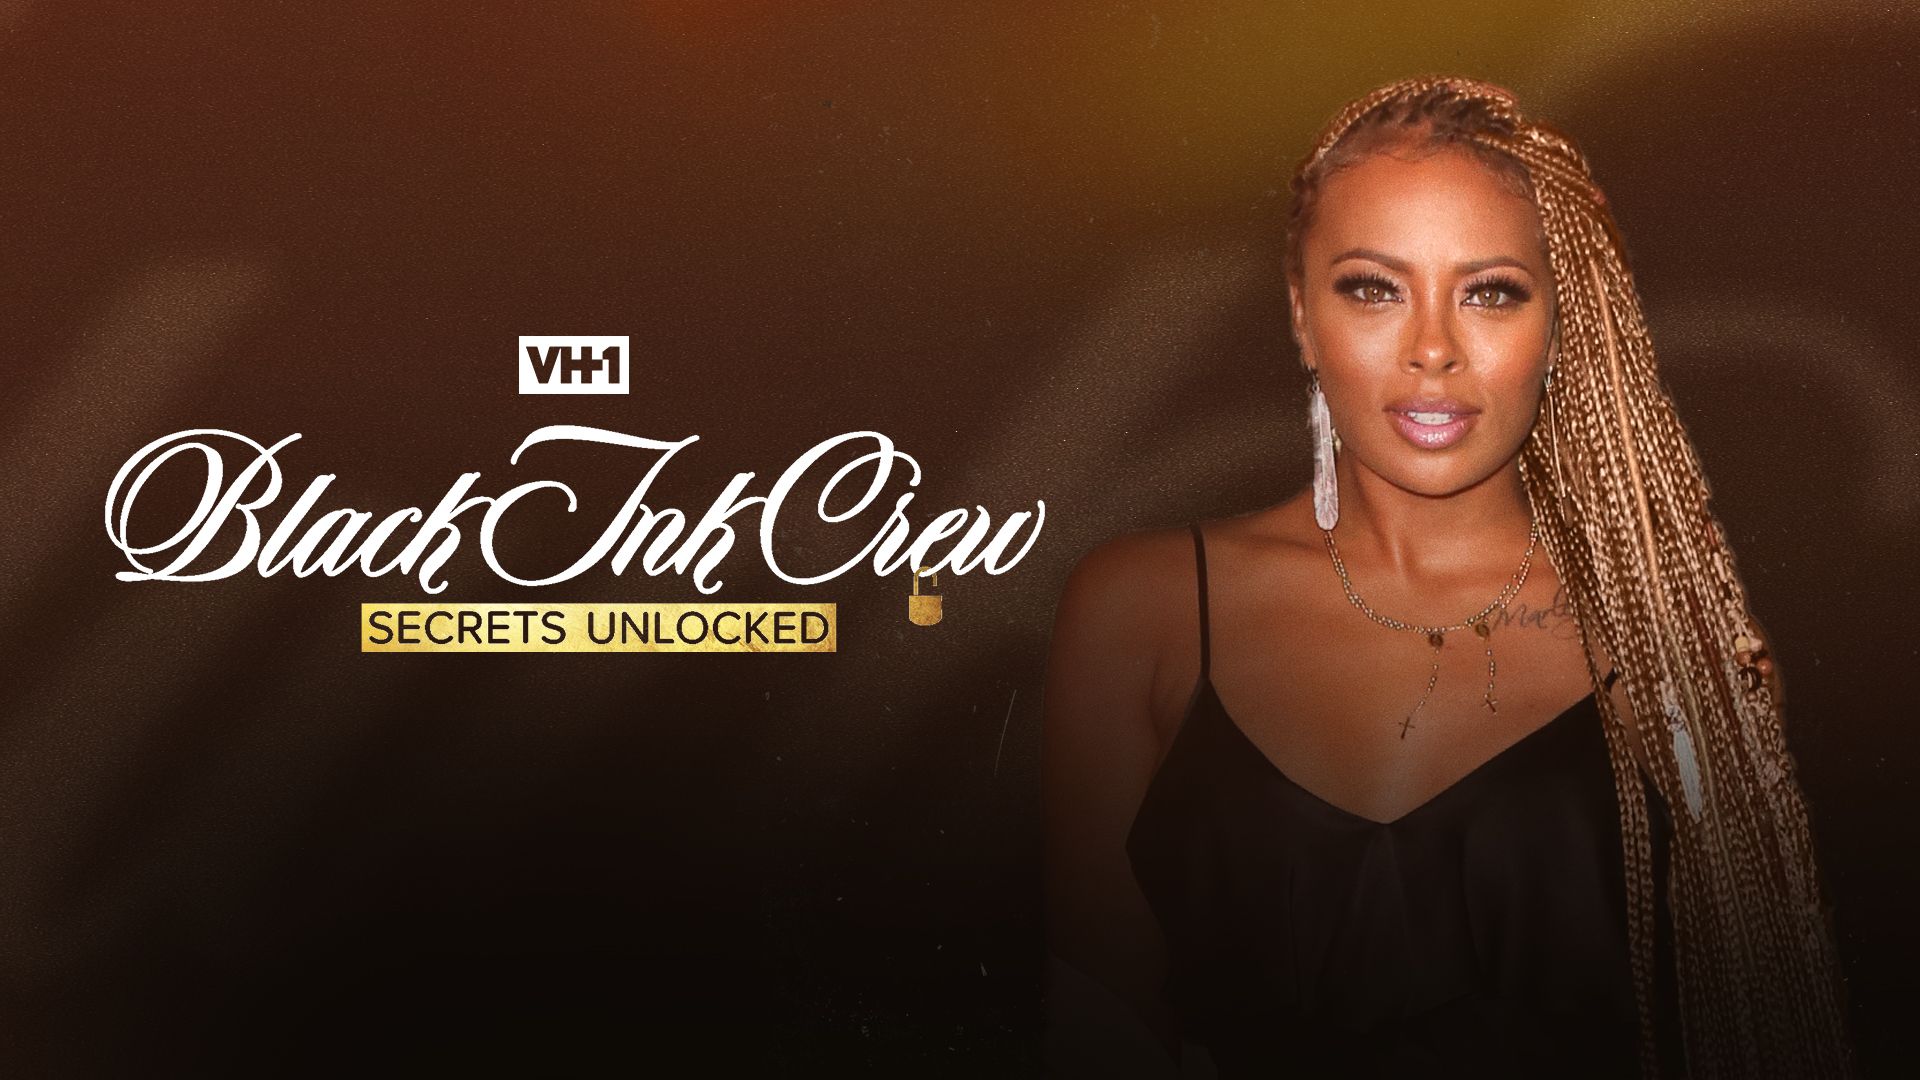 [WATCH] ‘Black Ink Crew’ Cast Share New Stories in Clip of ‘Secrets Unlocked’ Special